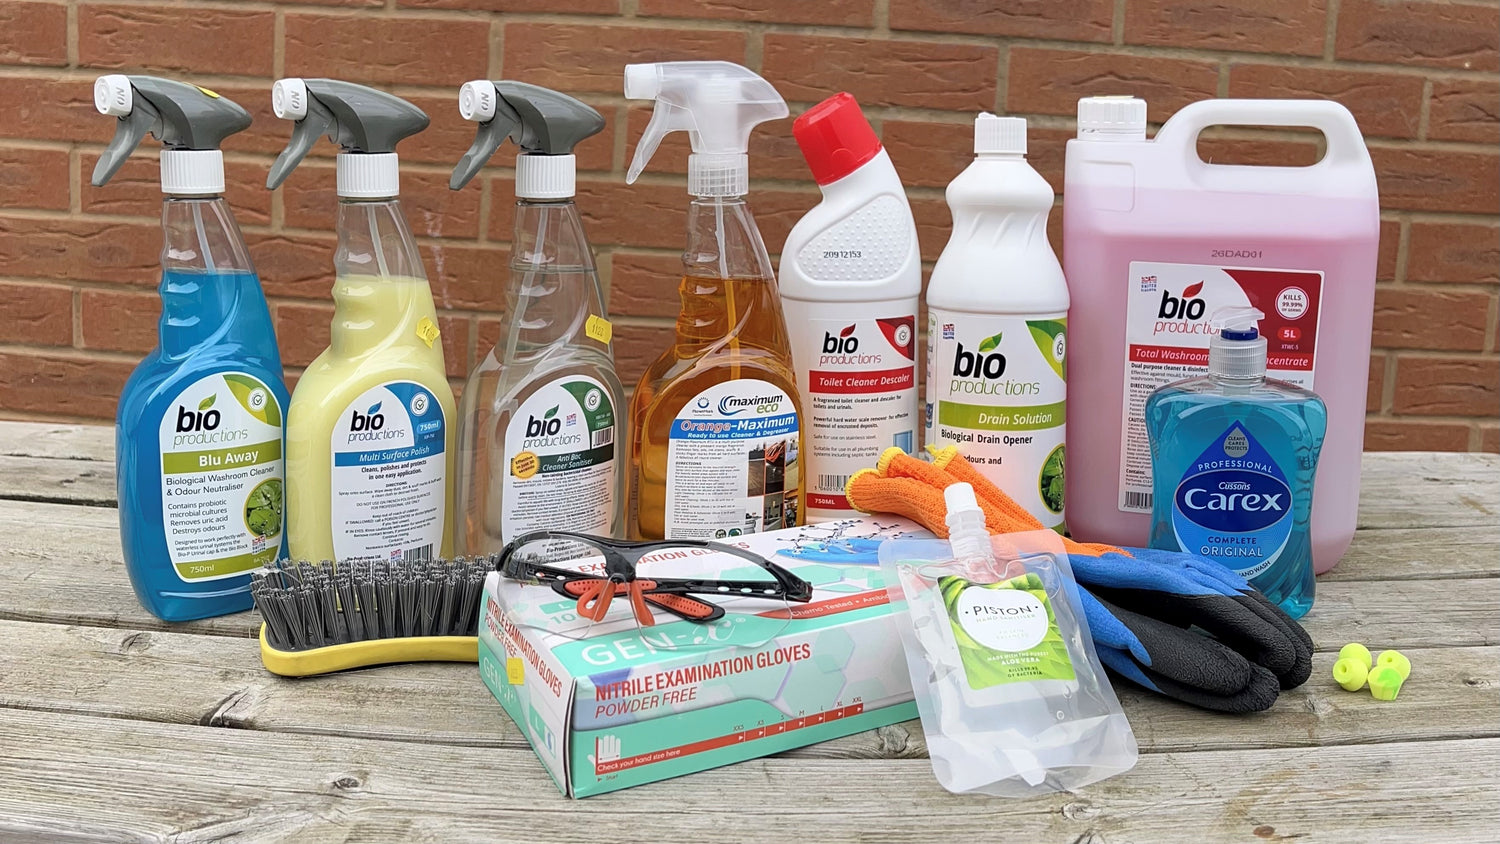 The Best 15 Mopping Cleaner Solutions